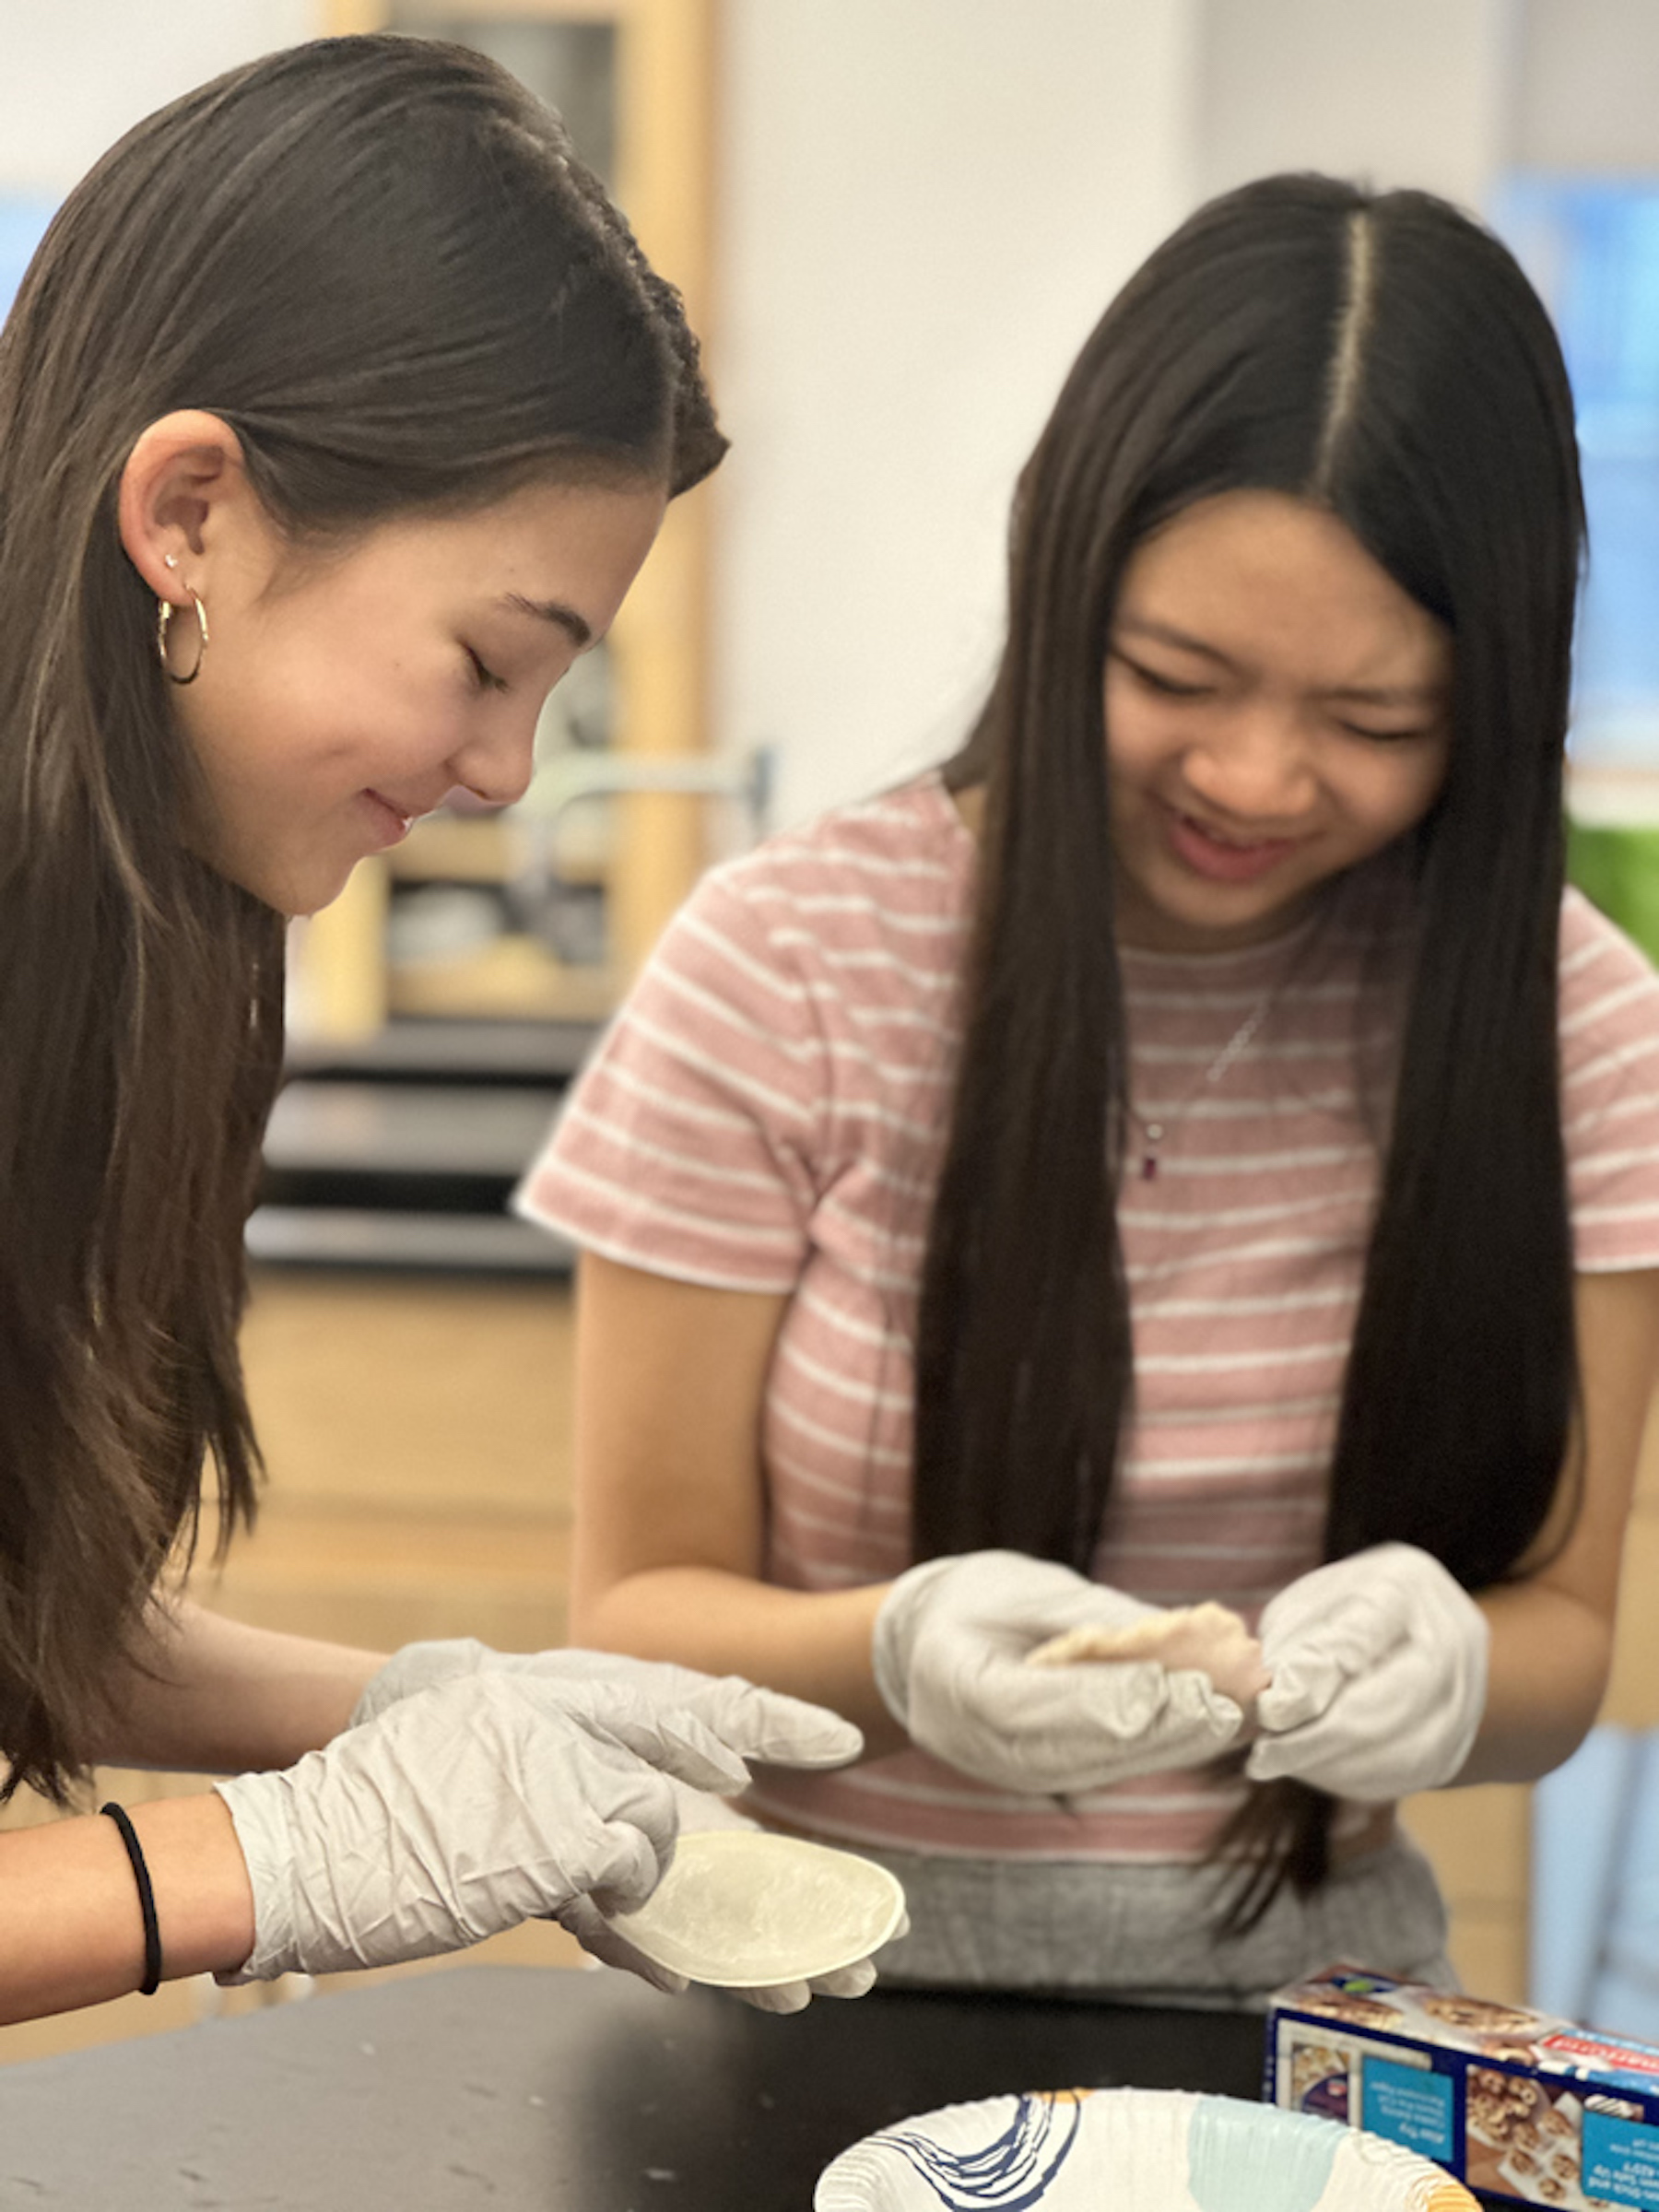 Two Fieldston Middle students wrap dumplings and smile together.